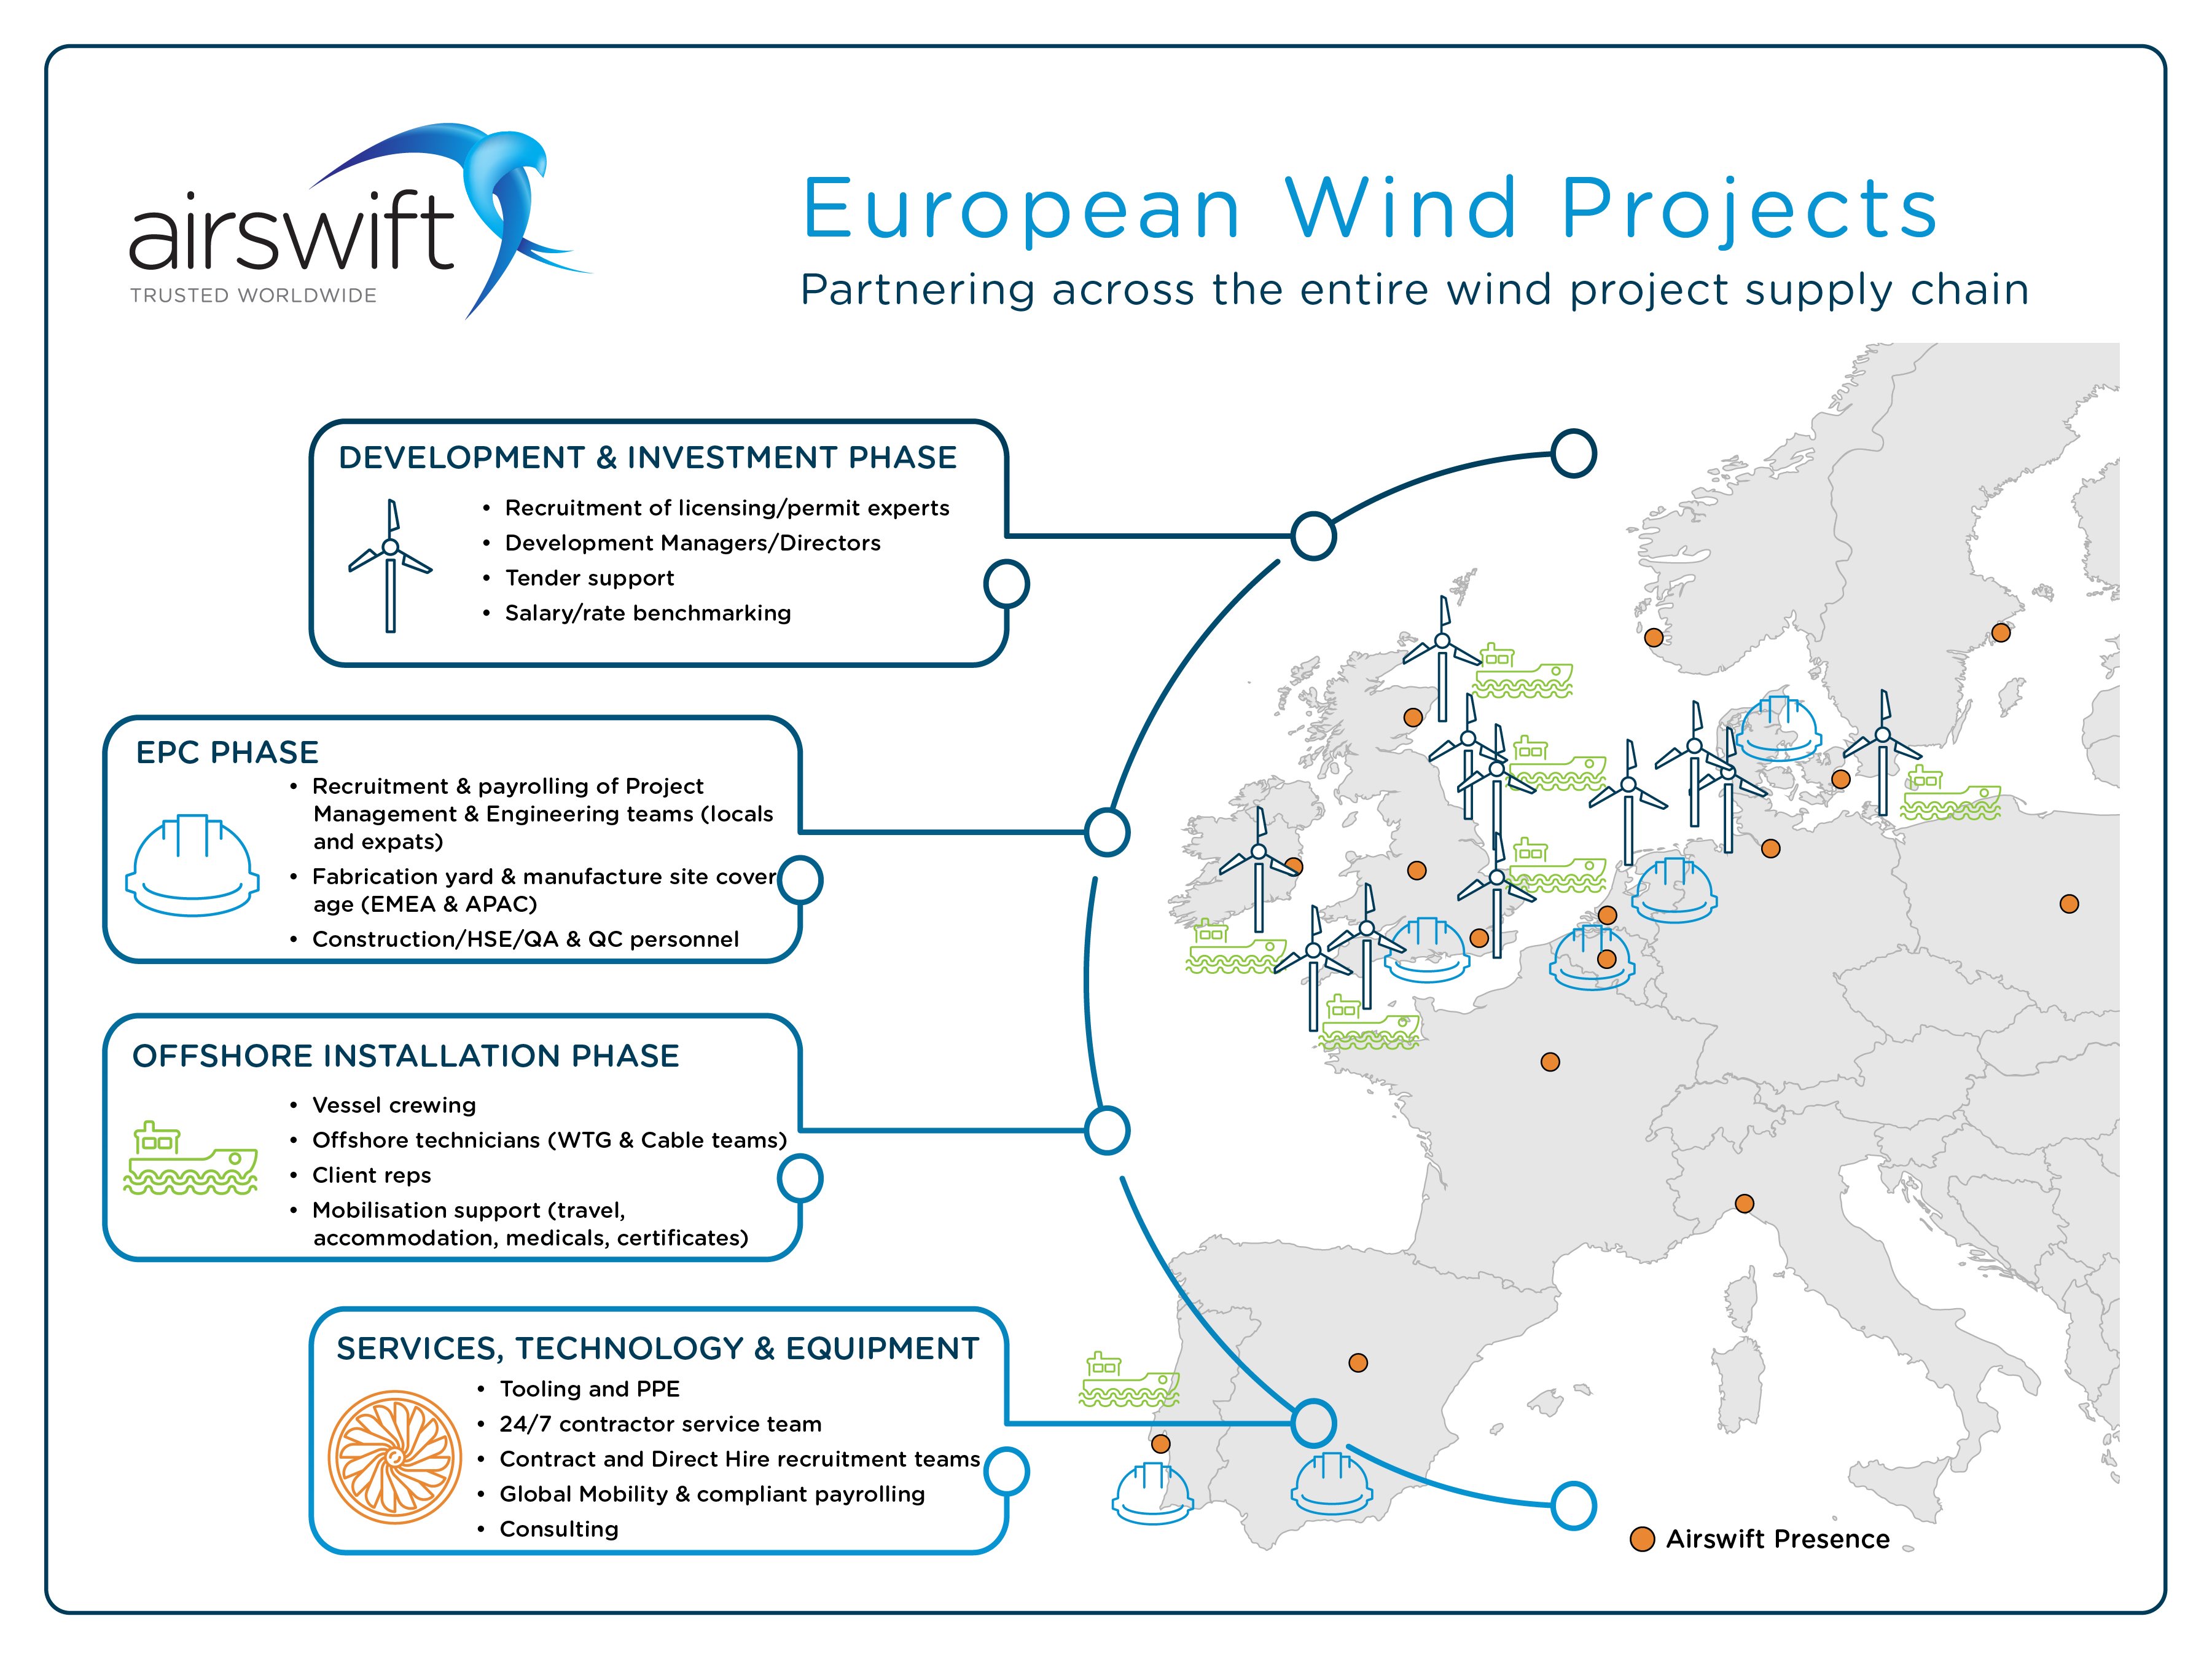 EUROPE-WindProjects